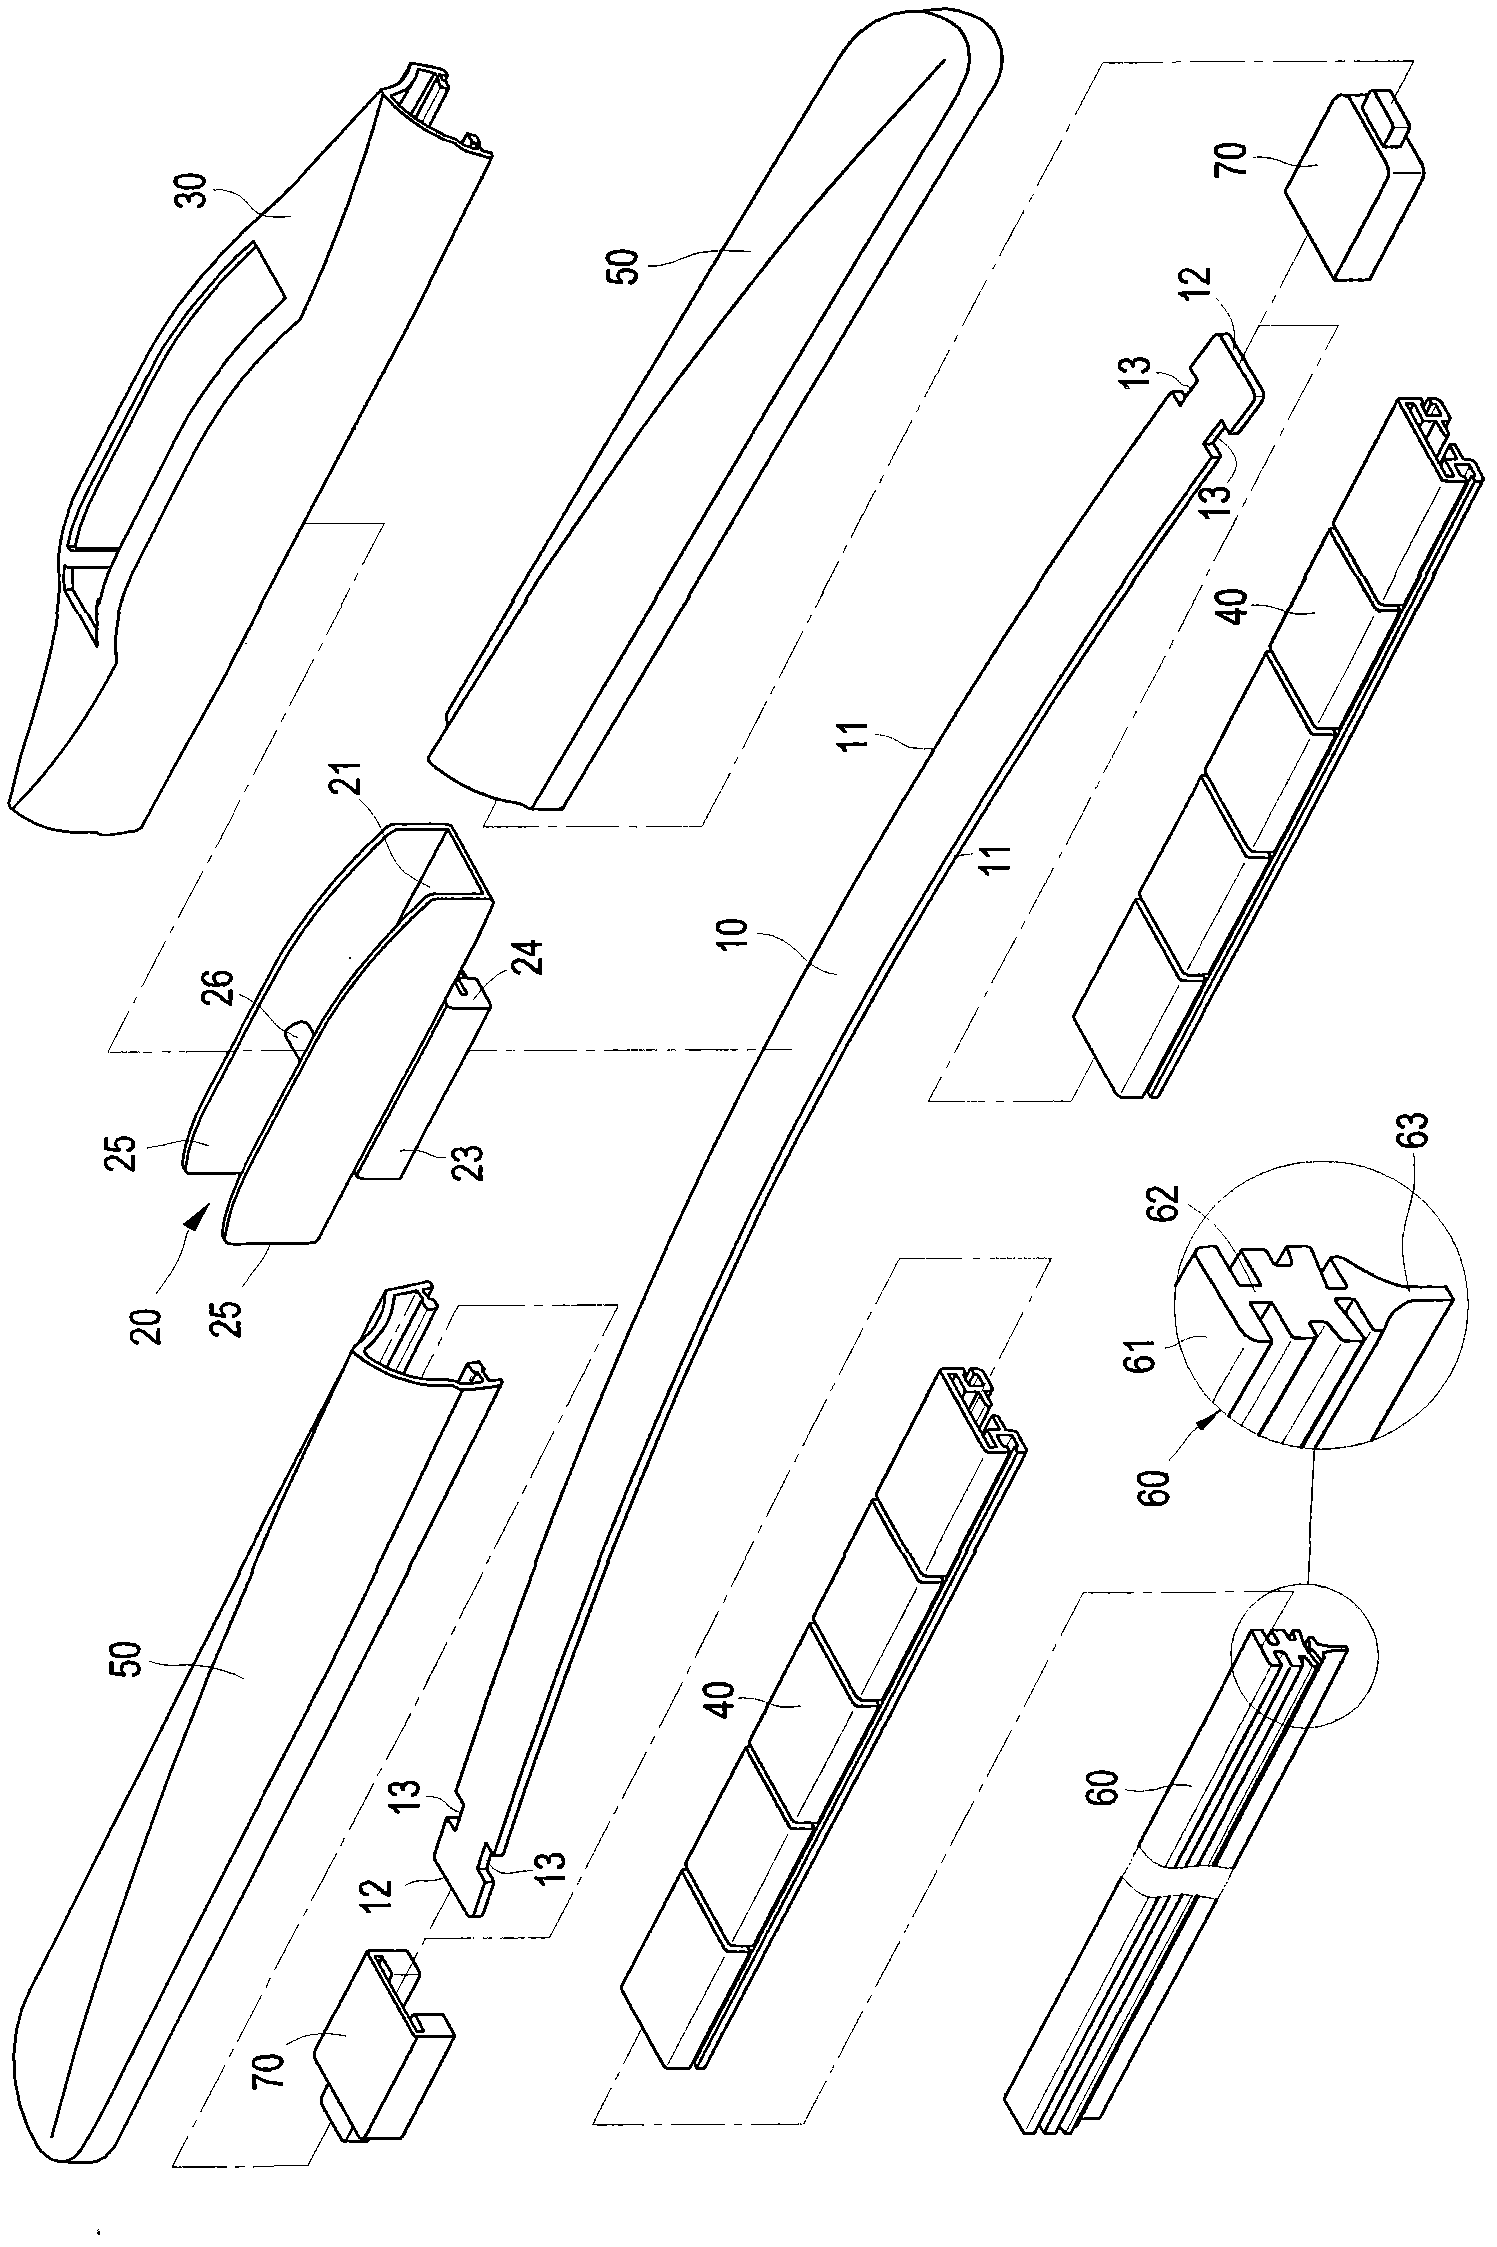 Adjustable non-support windshield wiper structure